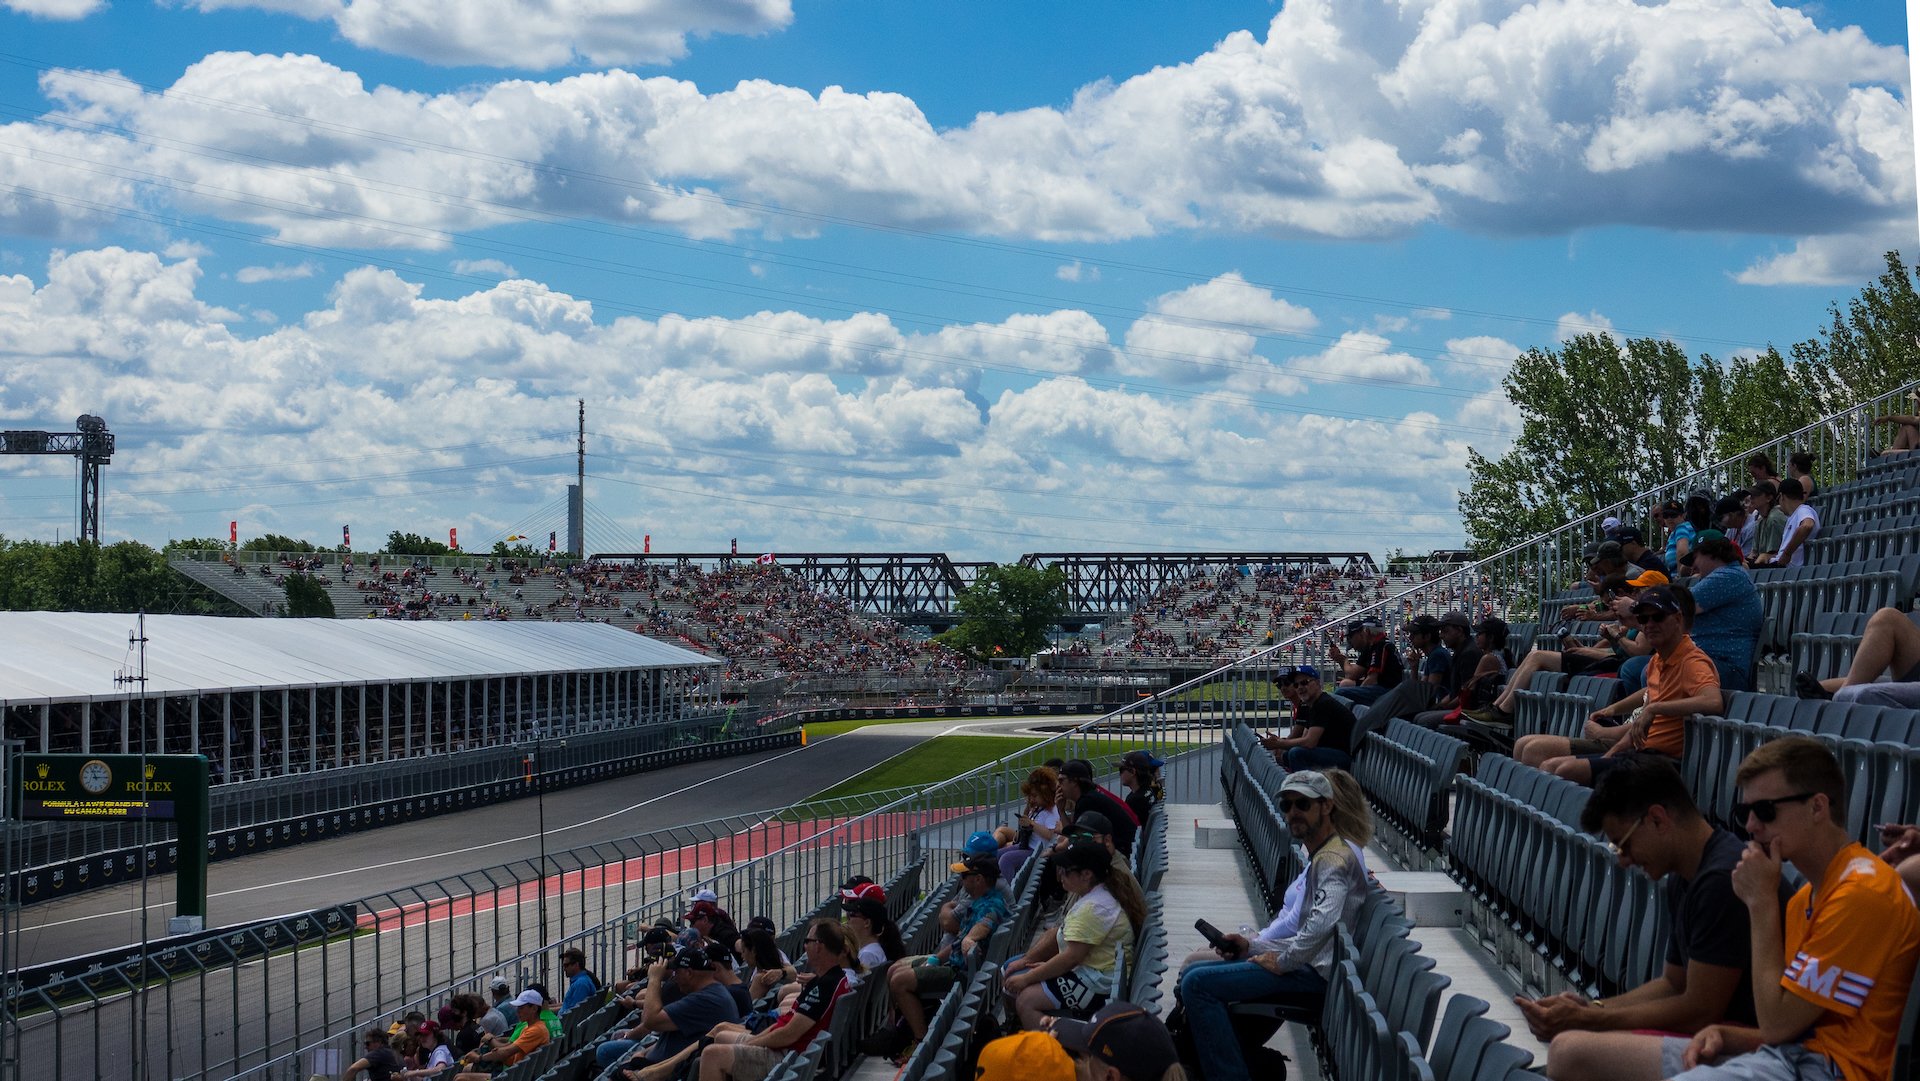  Looking up to the turn 2 grandstand, you could see it was filling in pretty well for being early on practice day. 